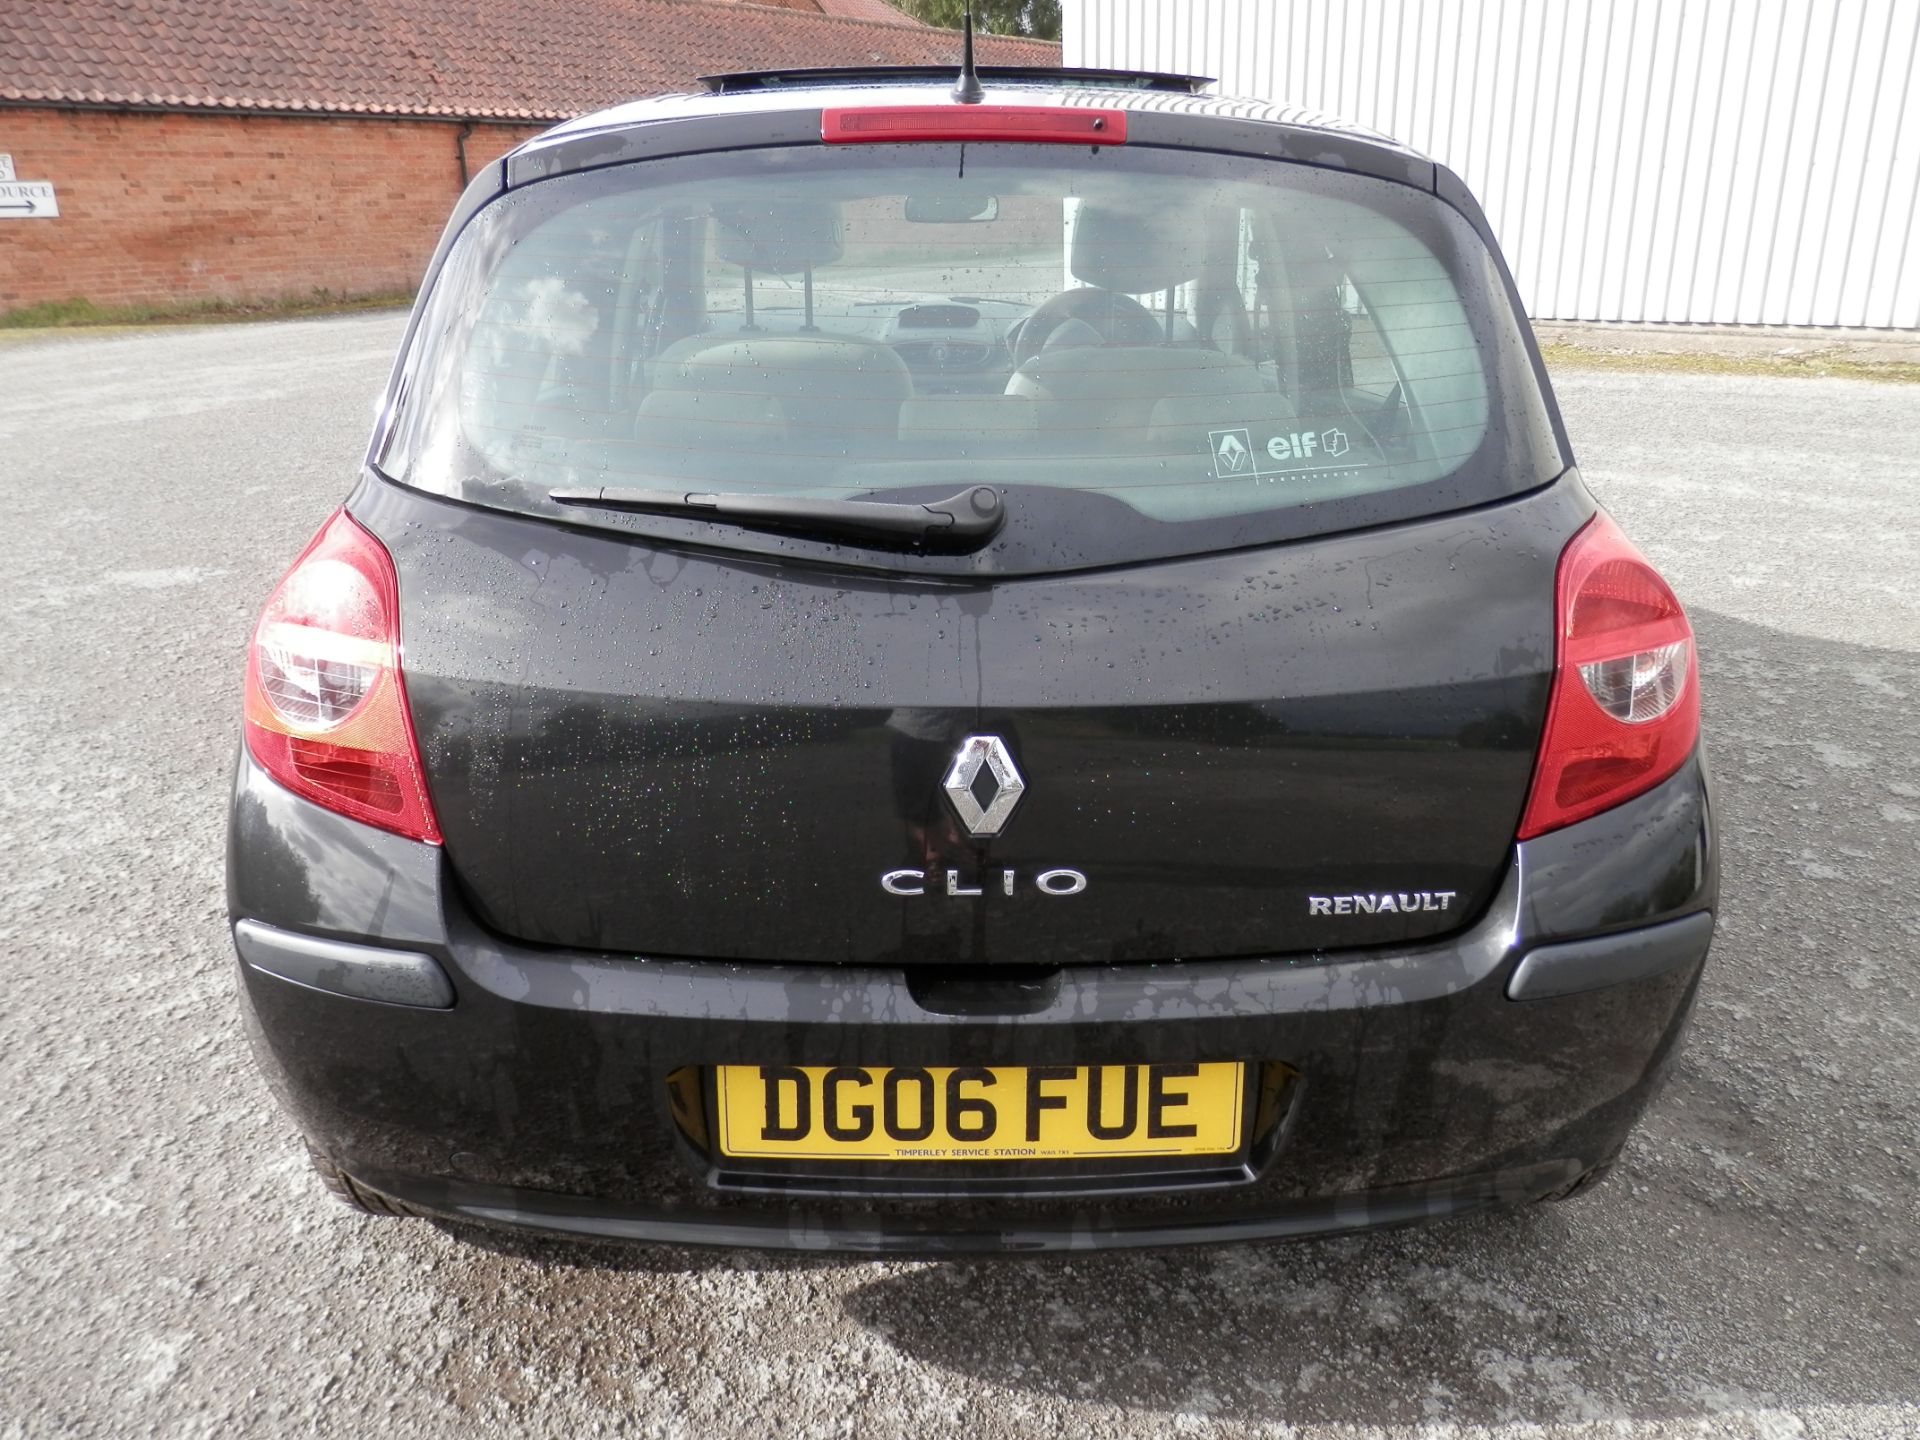 06/2006 RENAULT CLIO (FACELIFT MODEL) 1.4 EXPRESSION 16 VALVE, AIR CON, ONLY 47K MILES WARRANTED. - Image 3 of 26